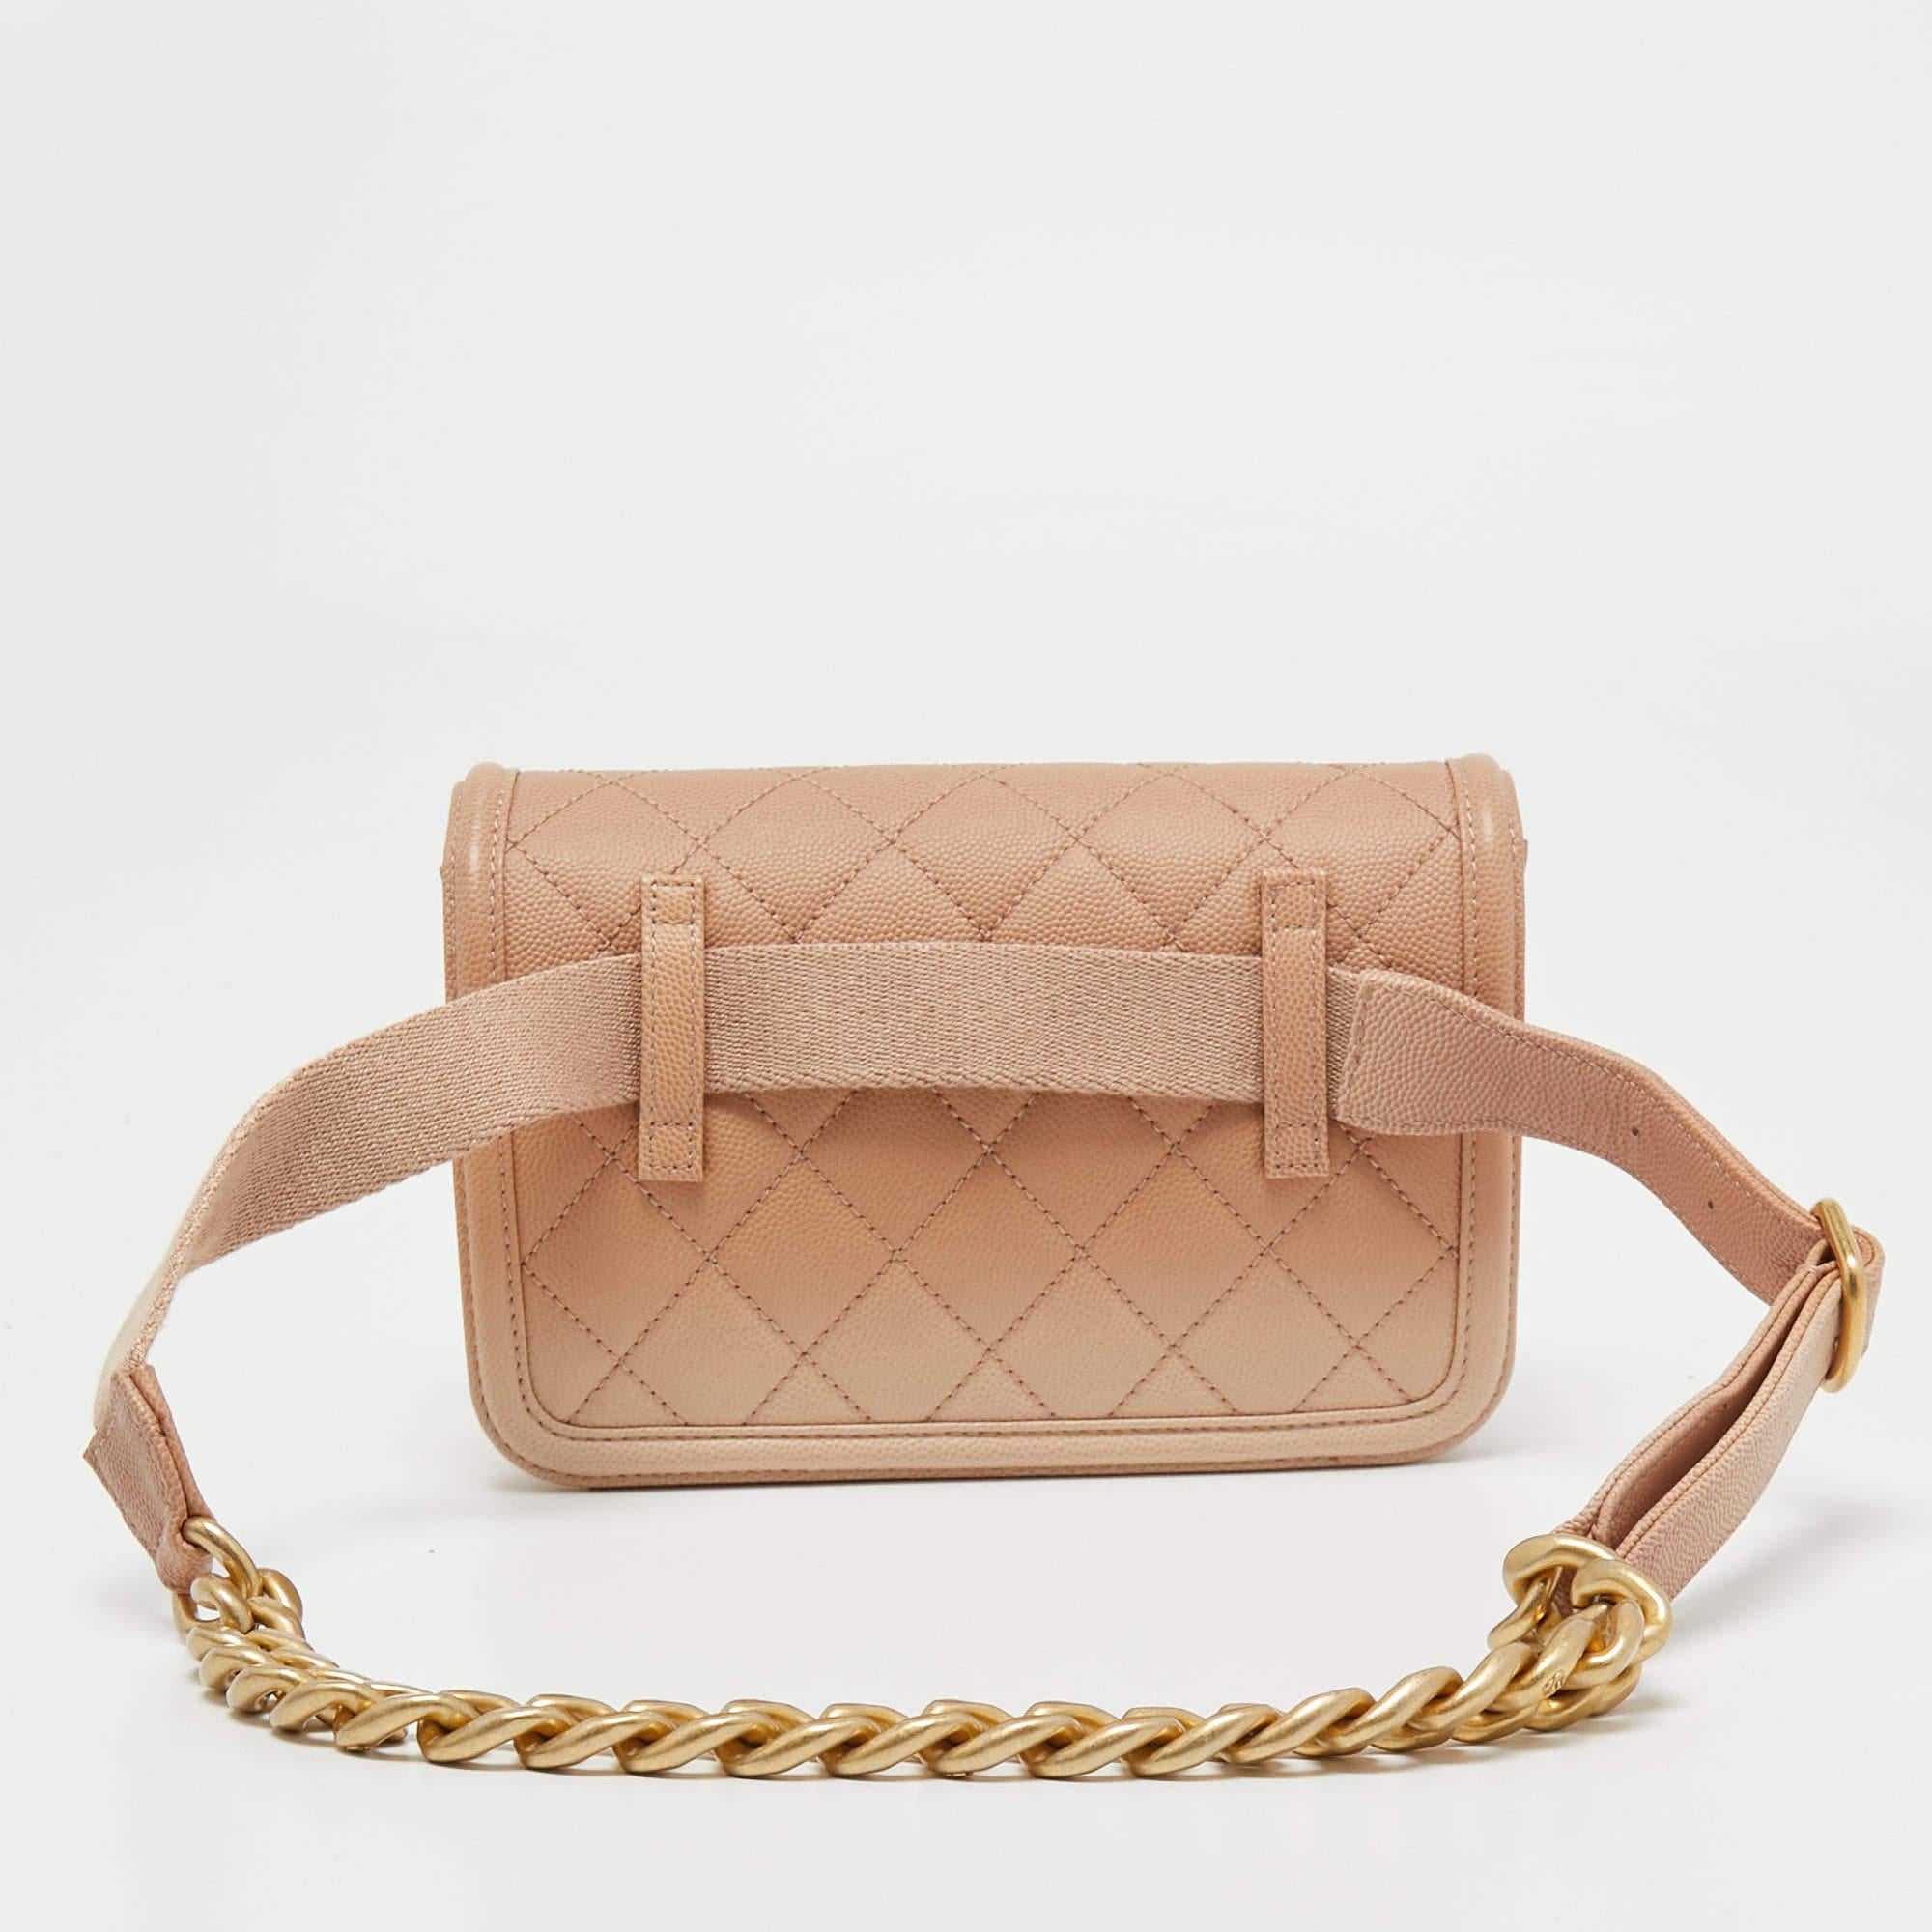 This belt bag from Chanel is indeed functional yet fashionable. It is crafted from quilted leather and displays the CC logo on the front in gold tone. It is completed with a front flap that reveals a well-sized interior. Wear it over jumpsuits for